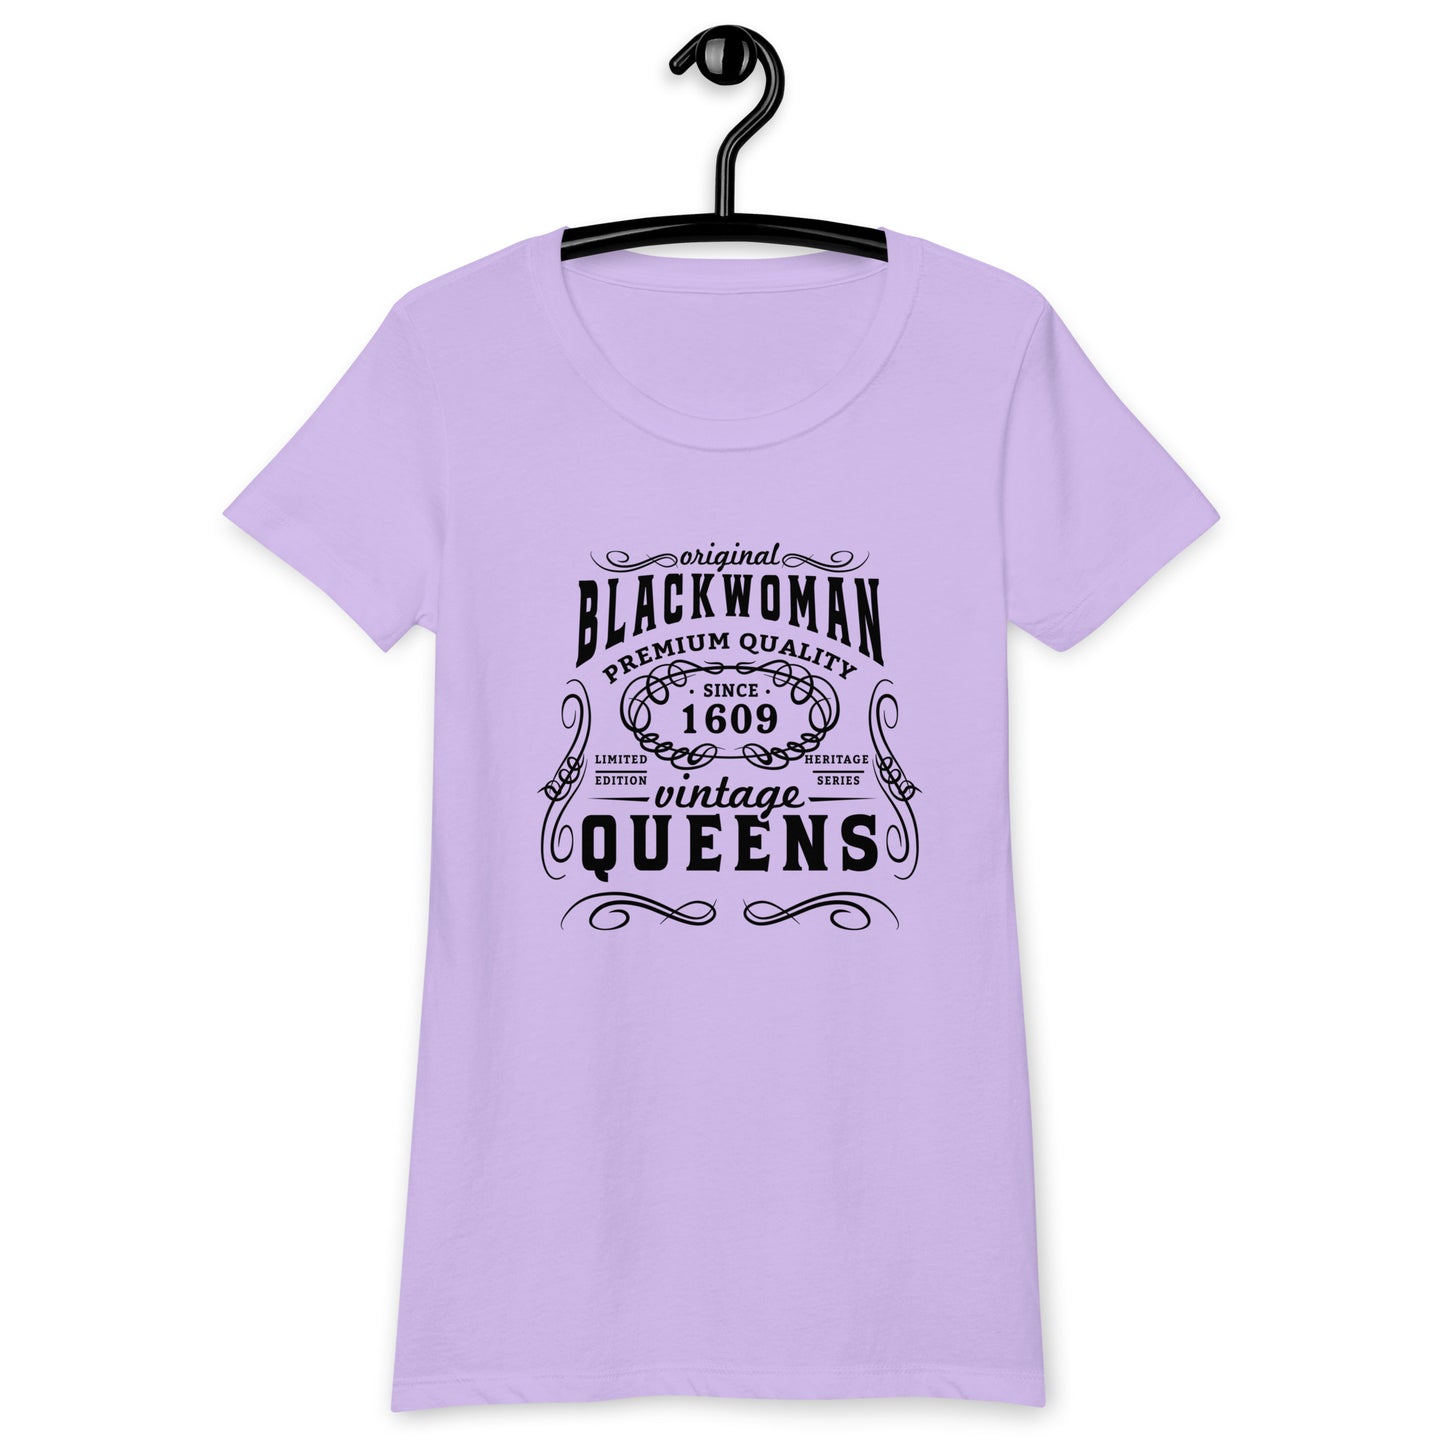 Black Women’s fitted t-shirt